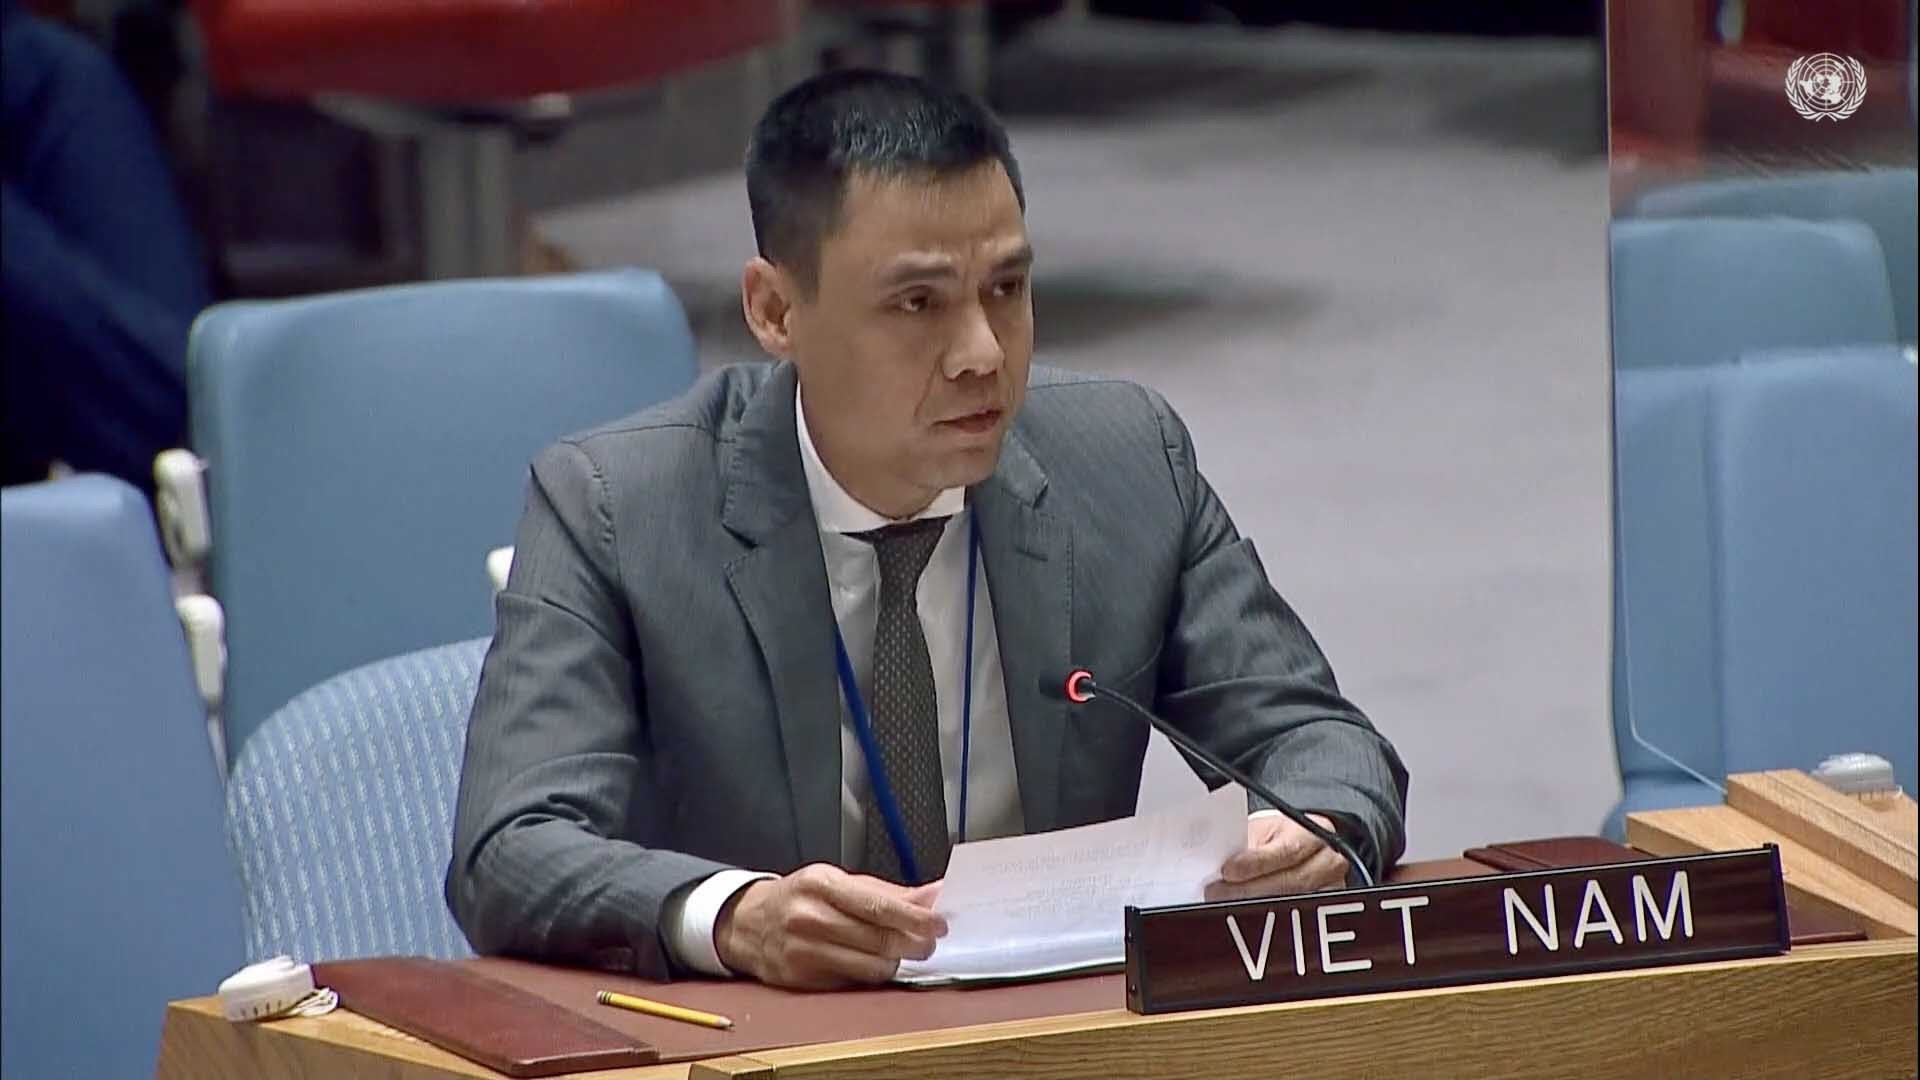 Vietnam calls for augmented efforts to protect civilians in conflicts